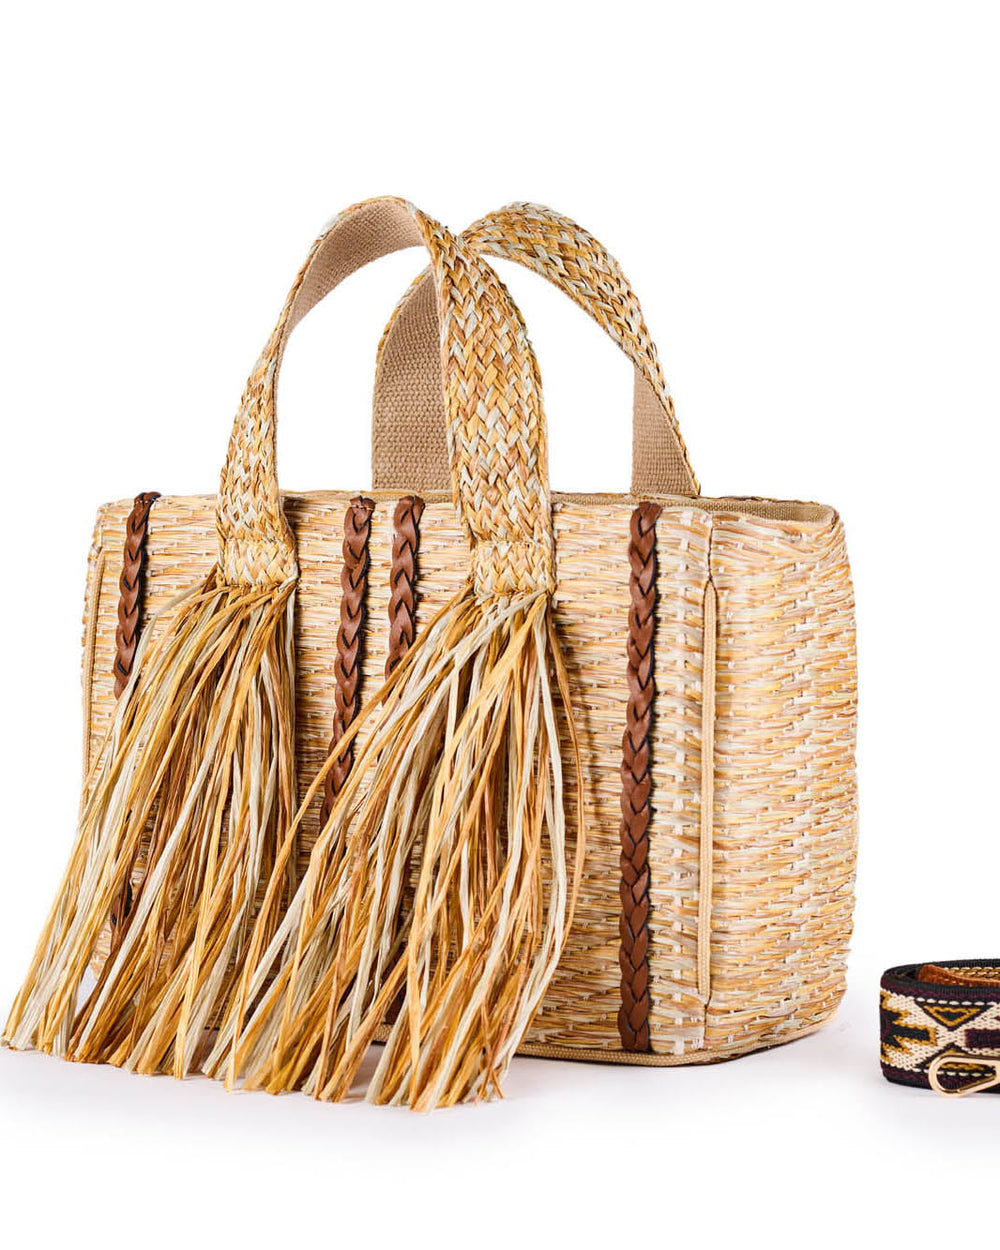 Woven straw handbag with braided leather accents and fringe detailing